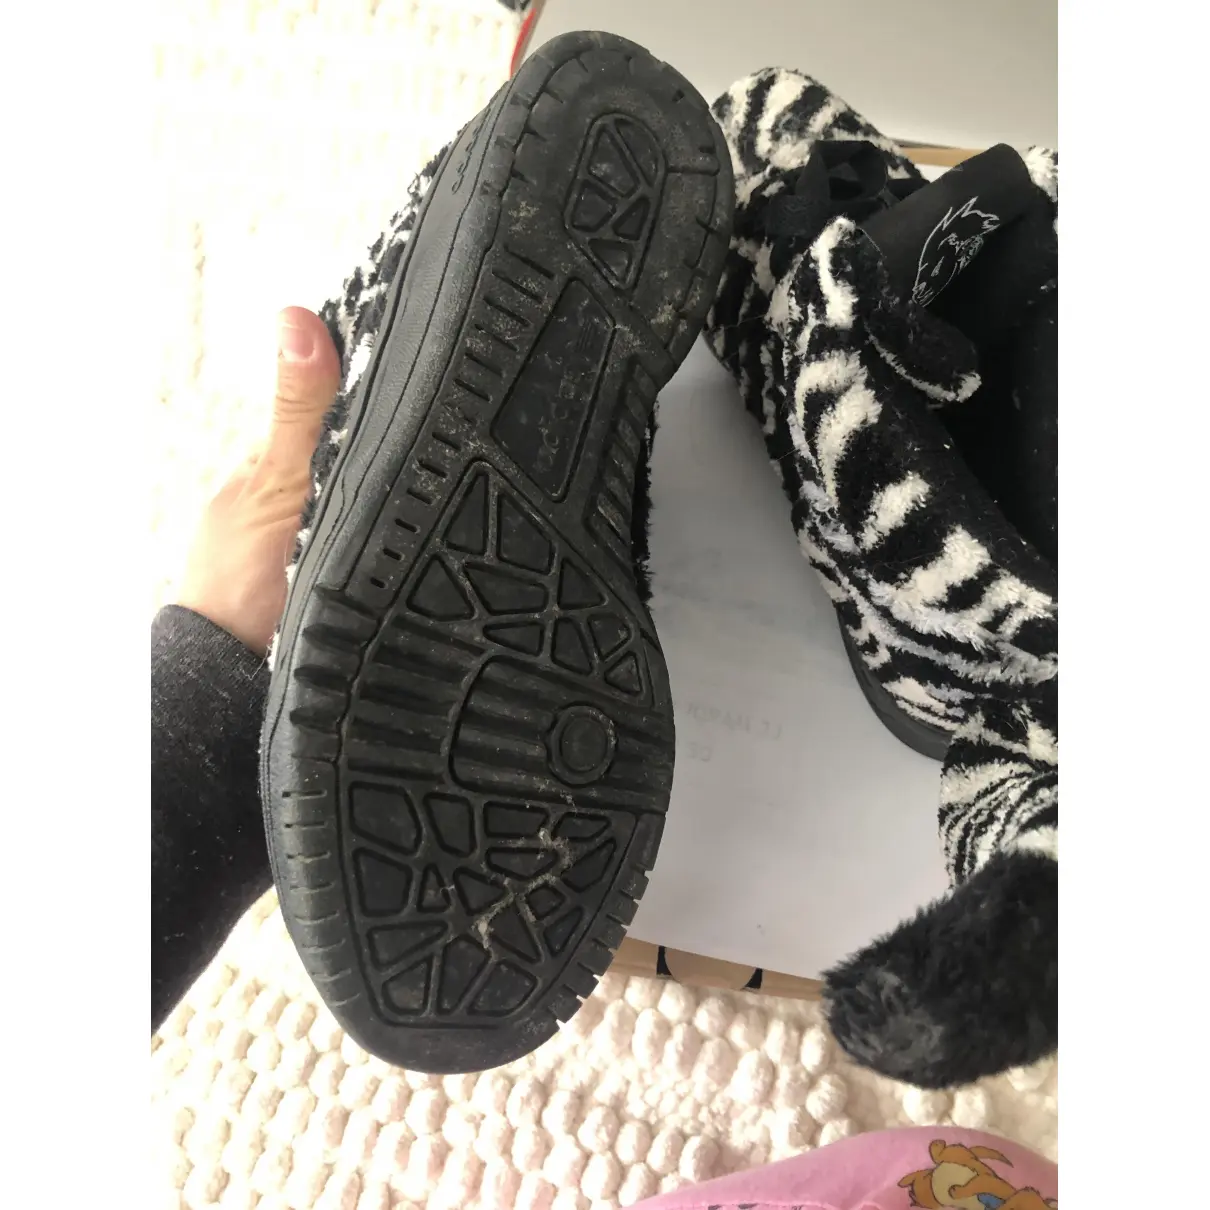 Faux fur trainers Adidas